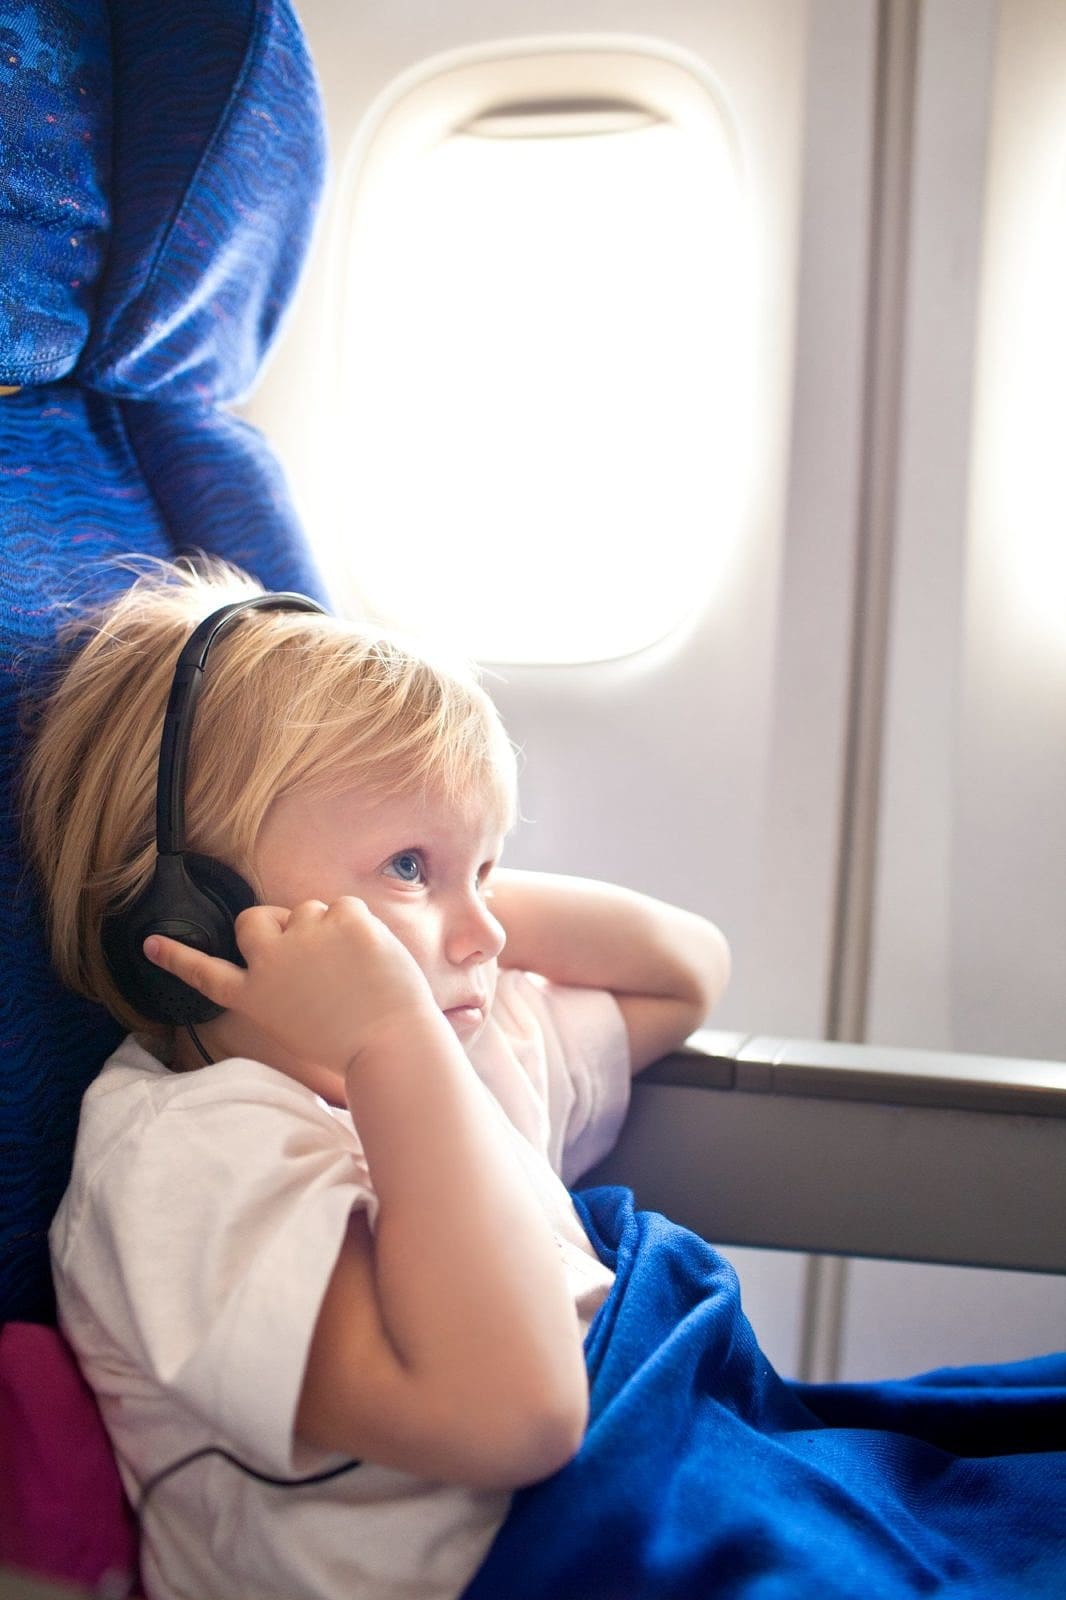 Listening to music or an audiobook distracts children from the feeling of motion sickness while traveling